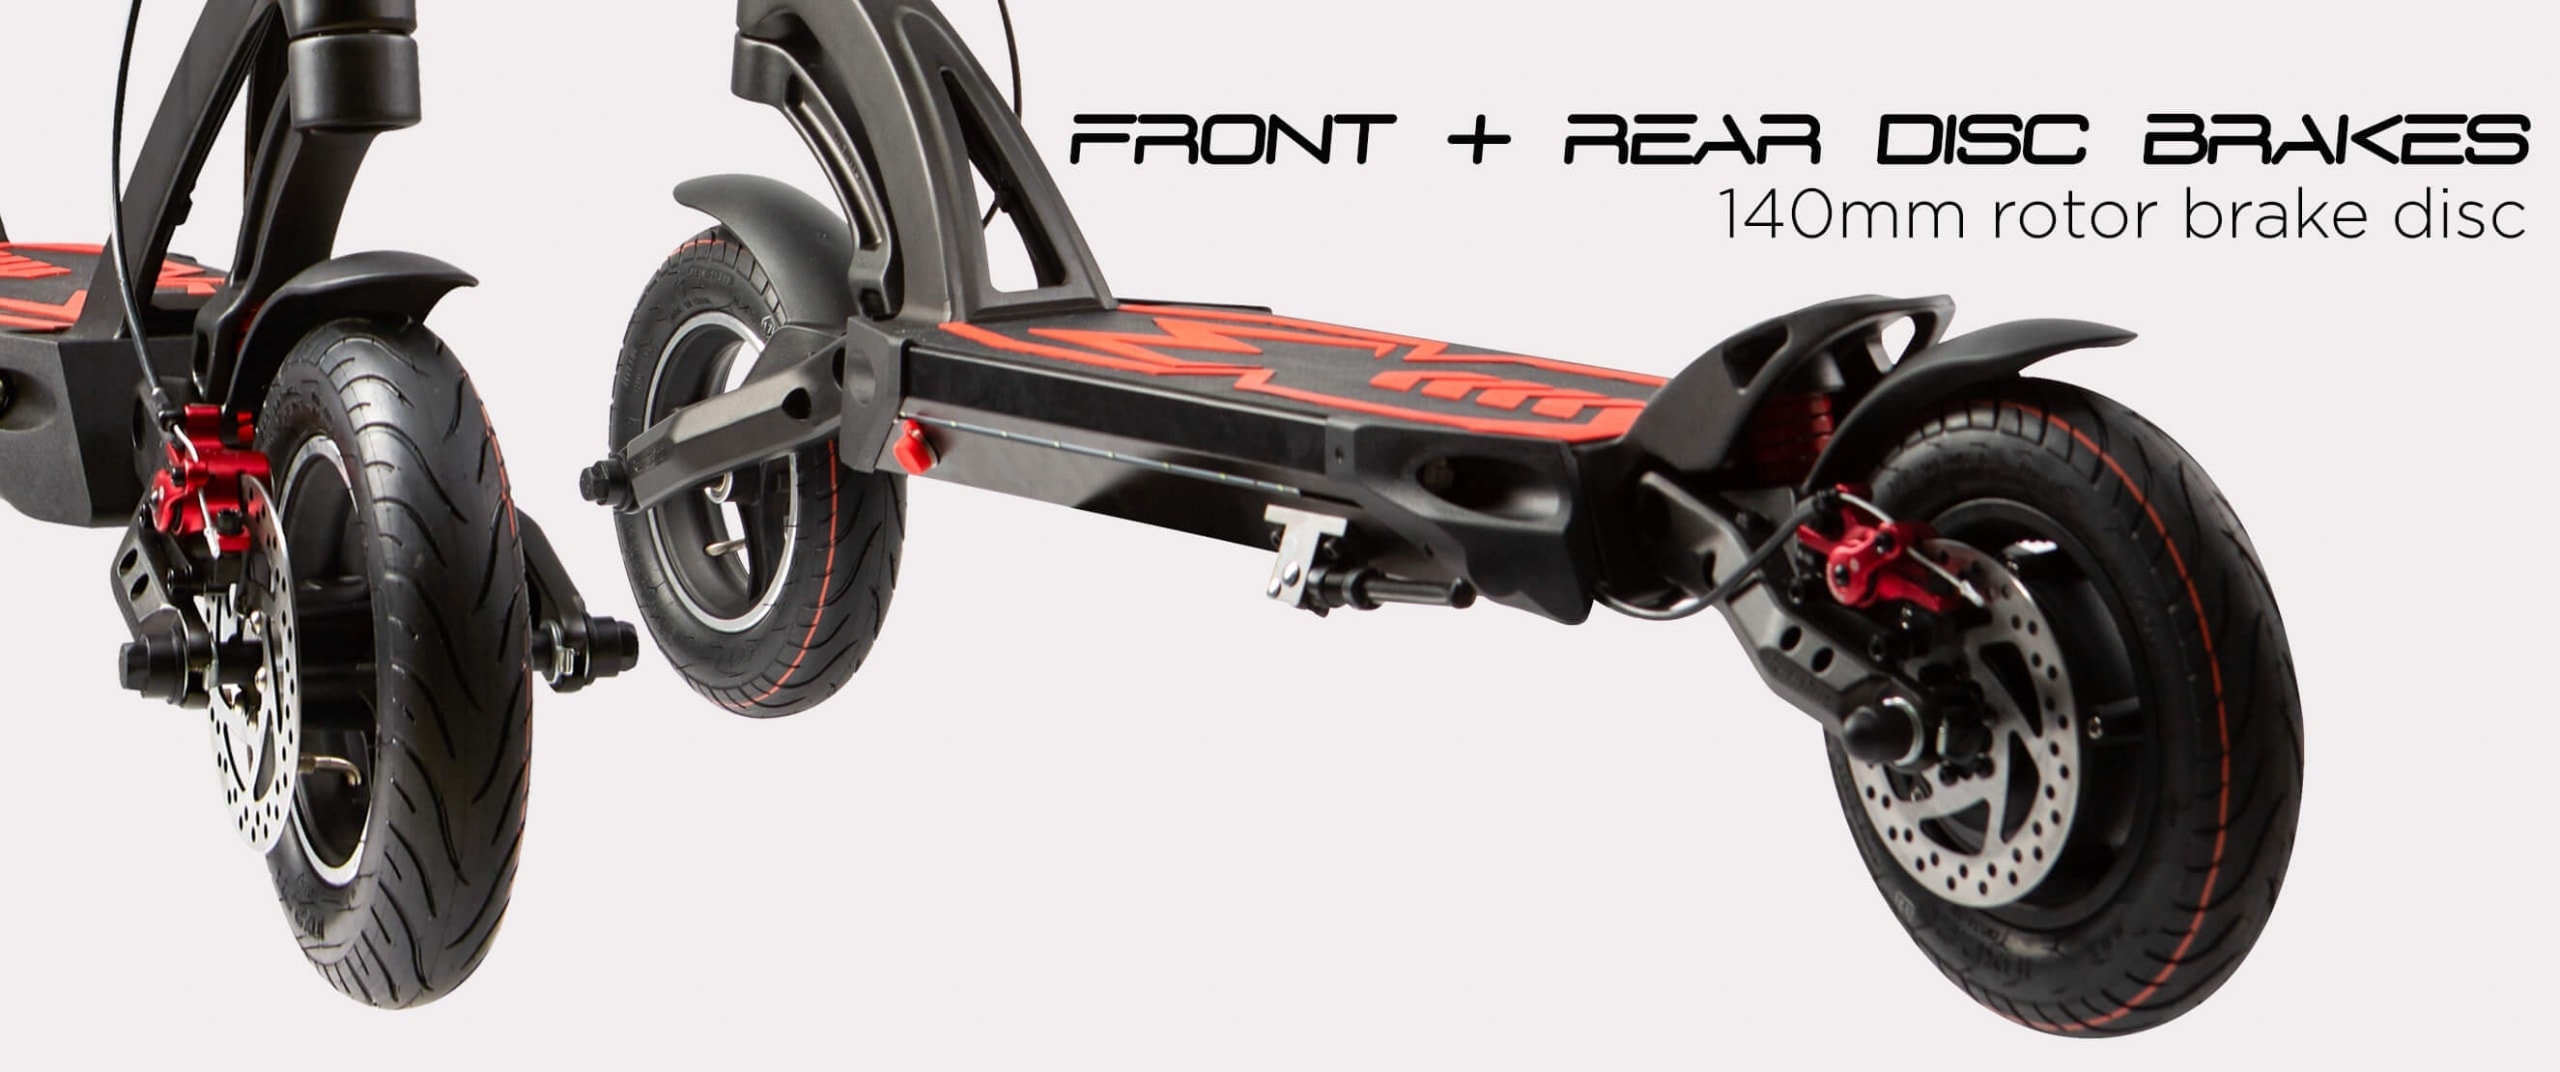 MOBOT MANTIS UL2272 certified high performance electric scooter double disc brakes